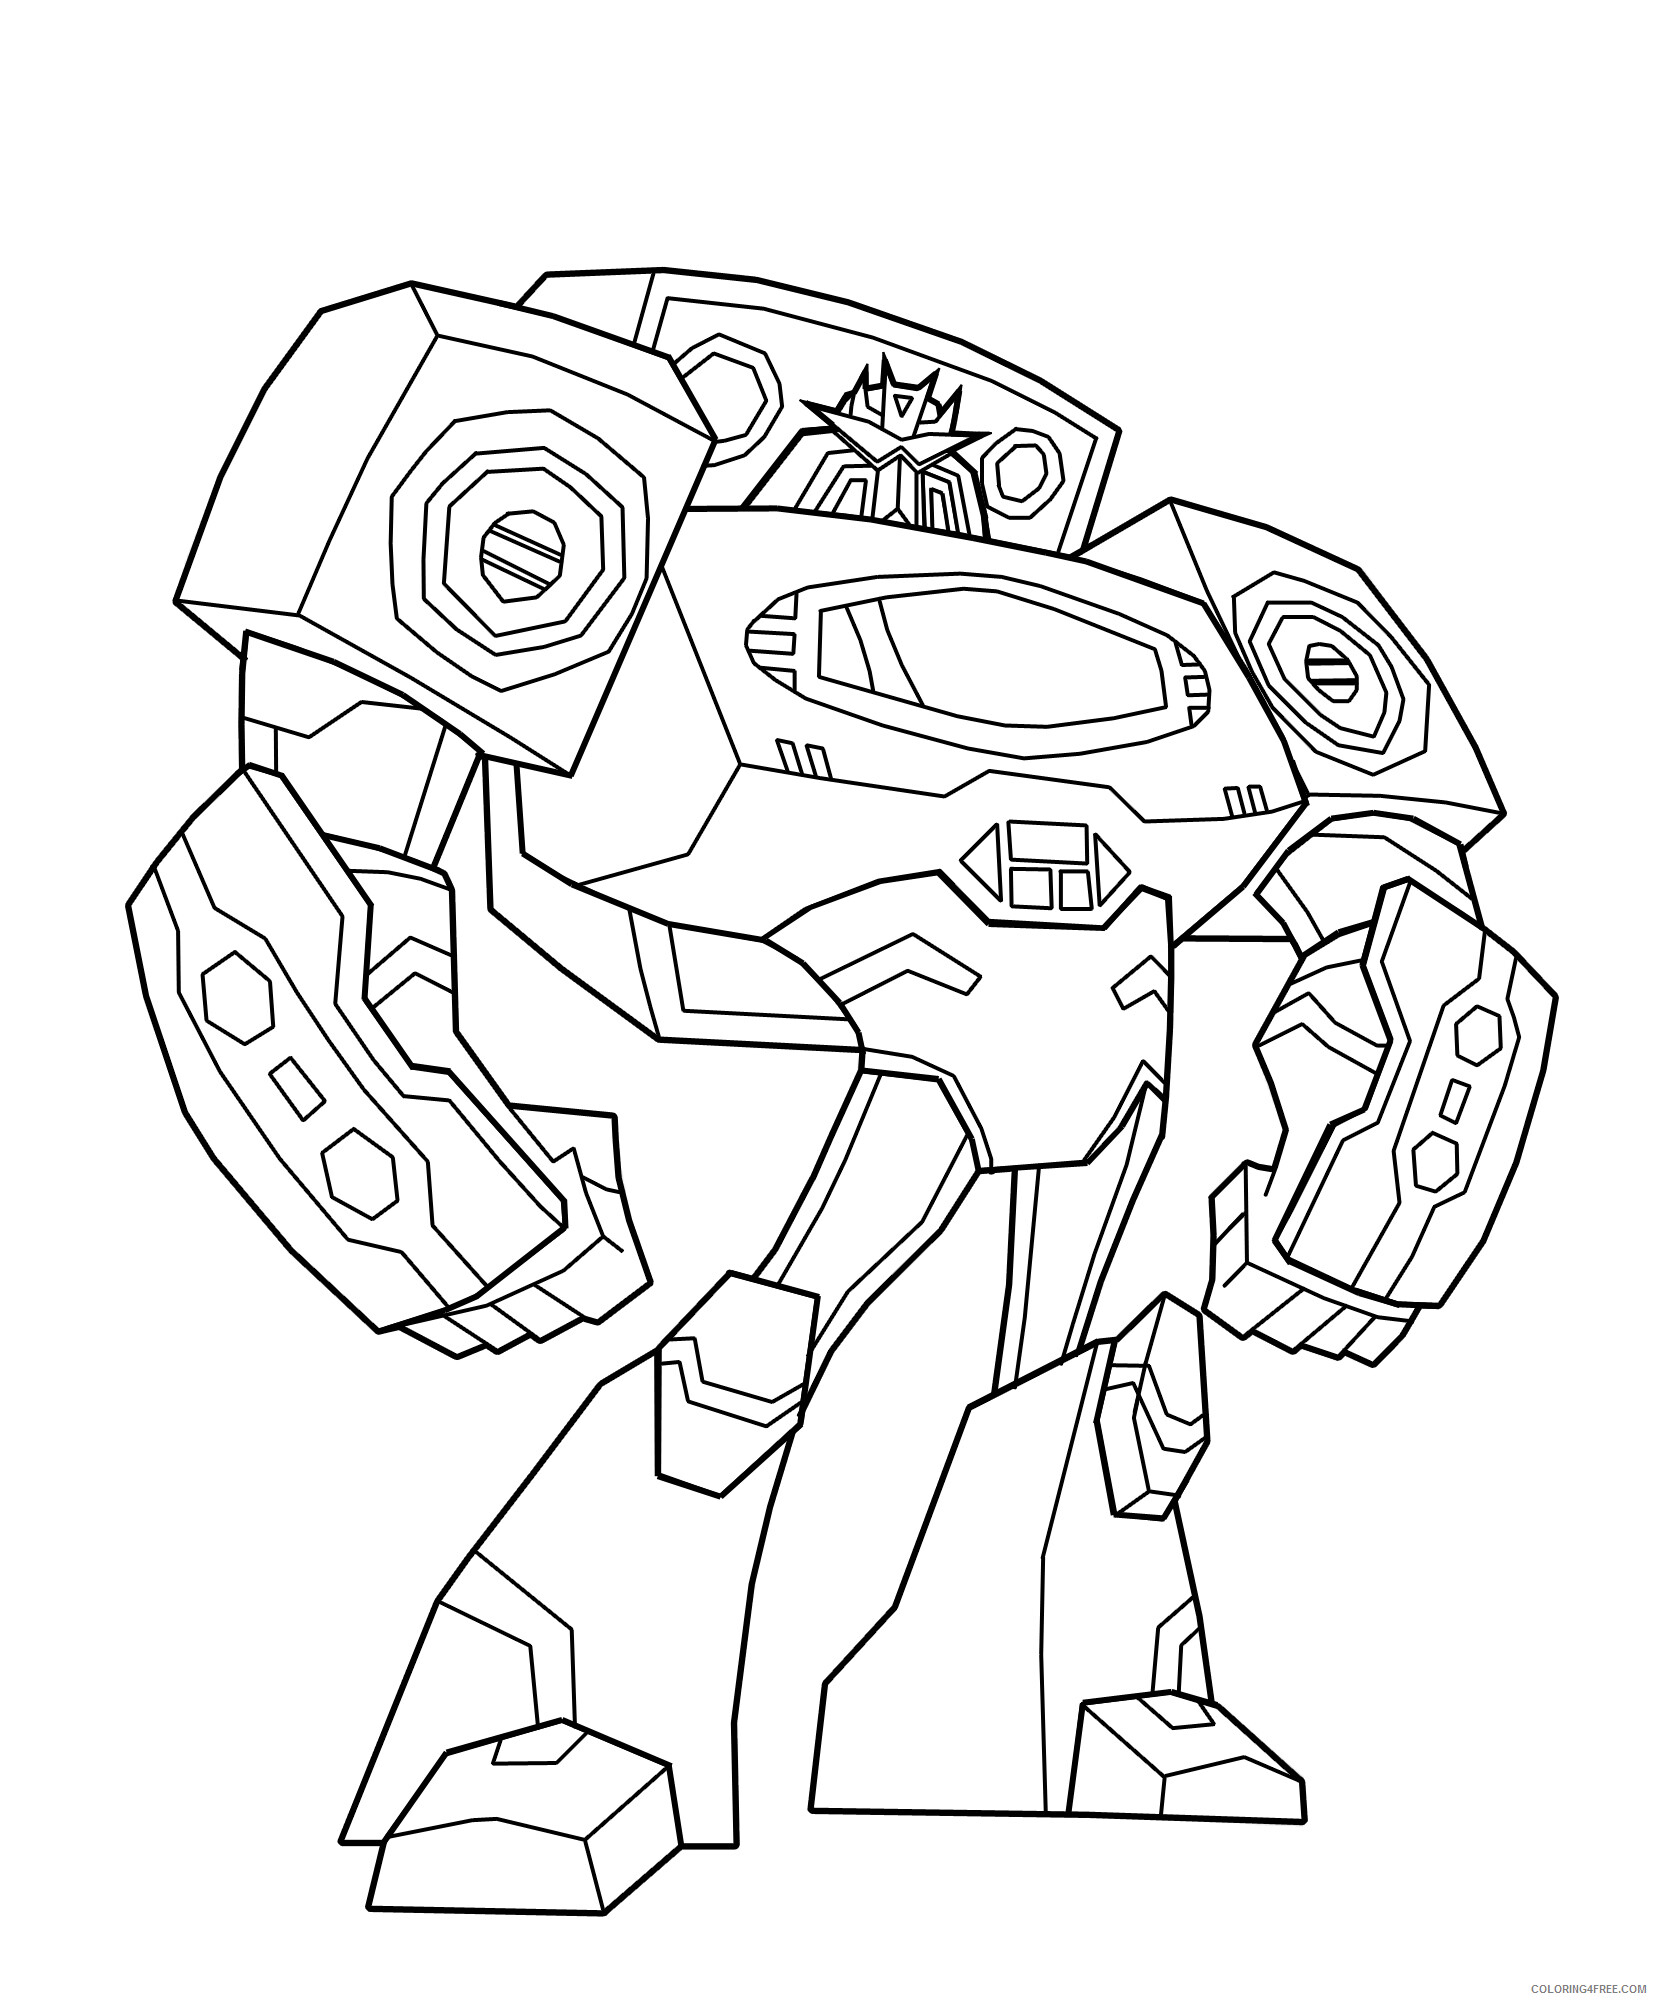 Transformers Coloring Pages TV Film Transformers 2 Printable 2020 10646 Coloring4free